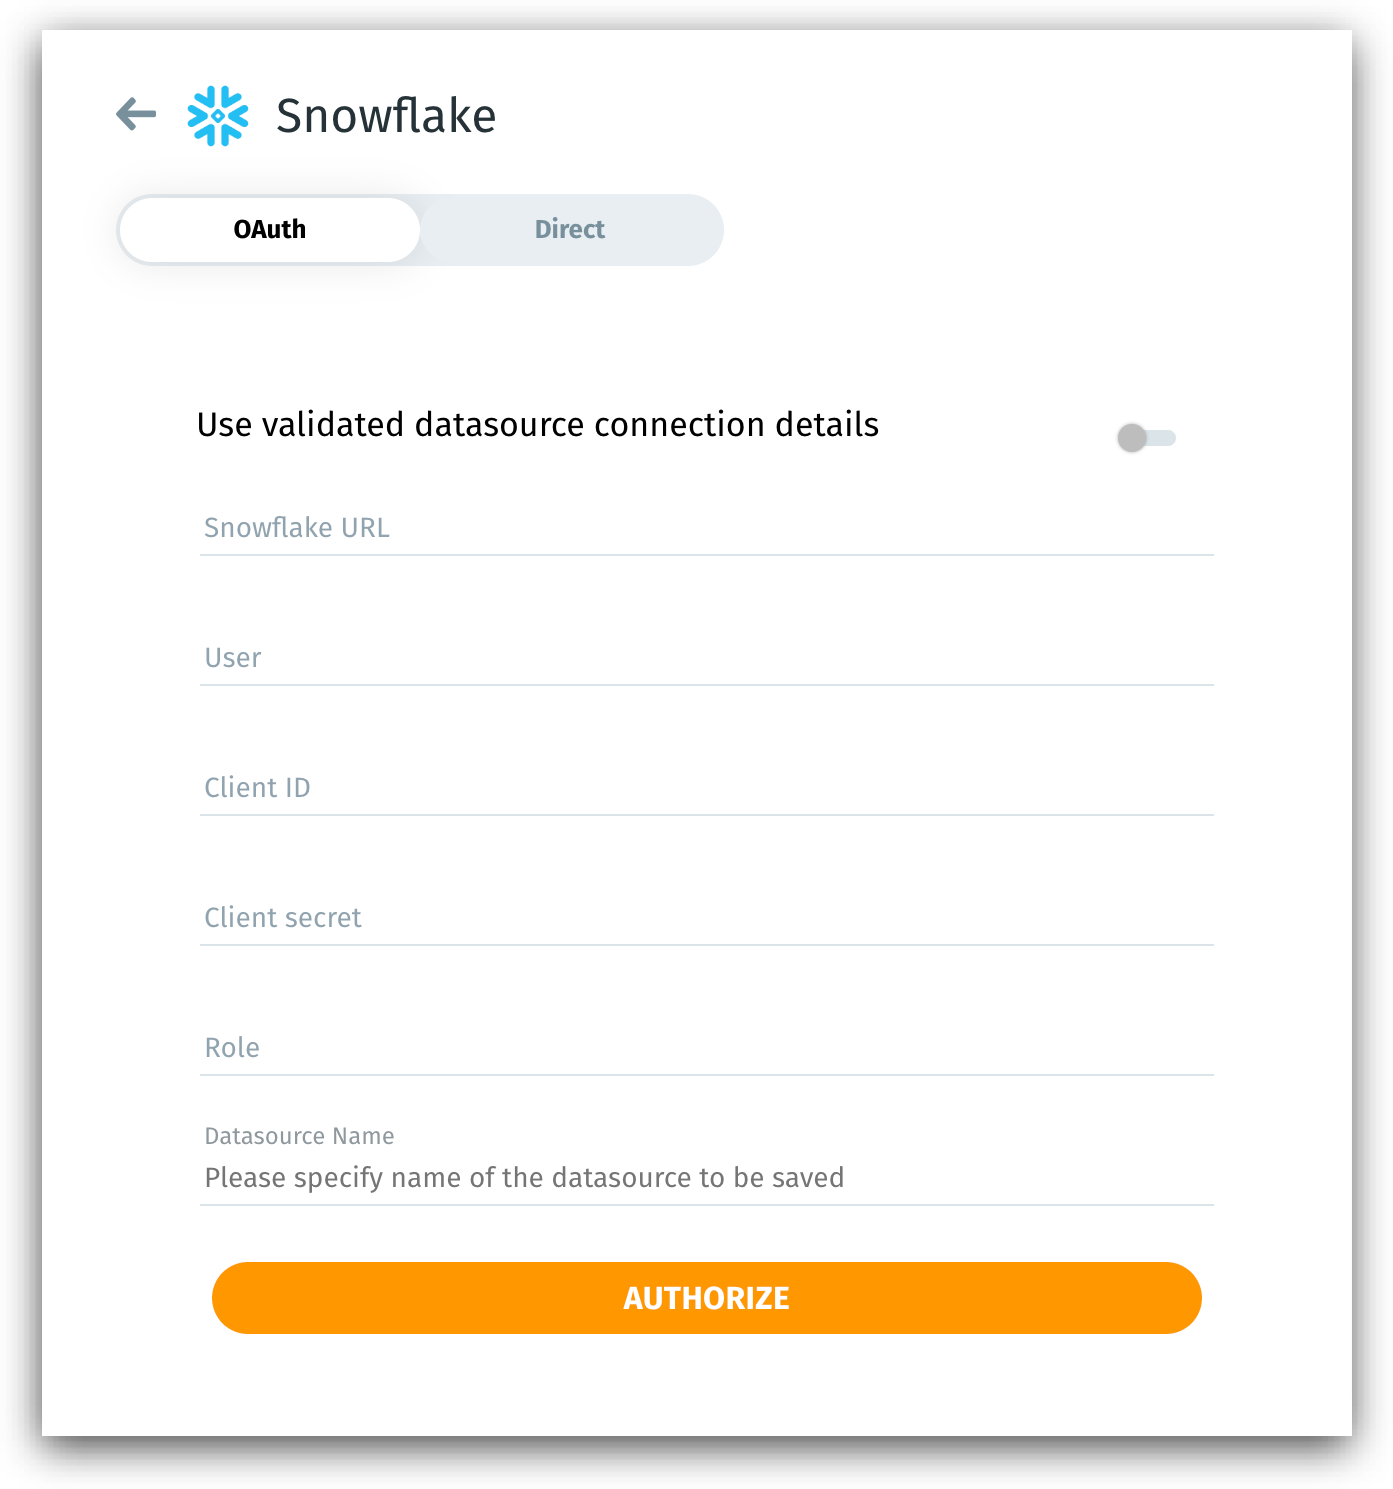 OAuth-based authentication for Snowflake